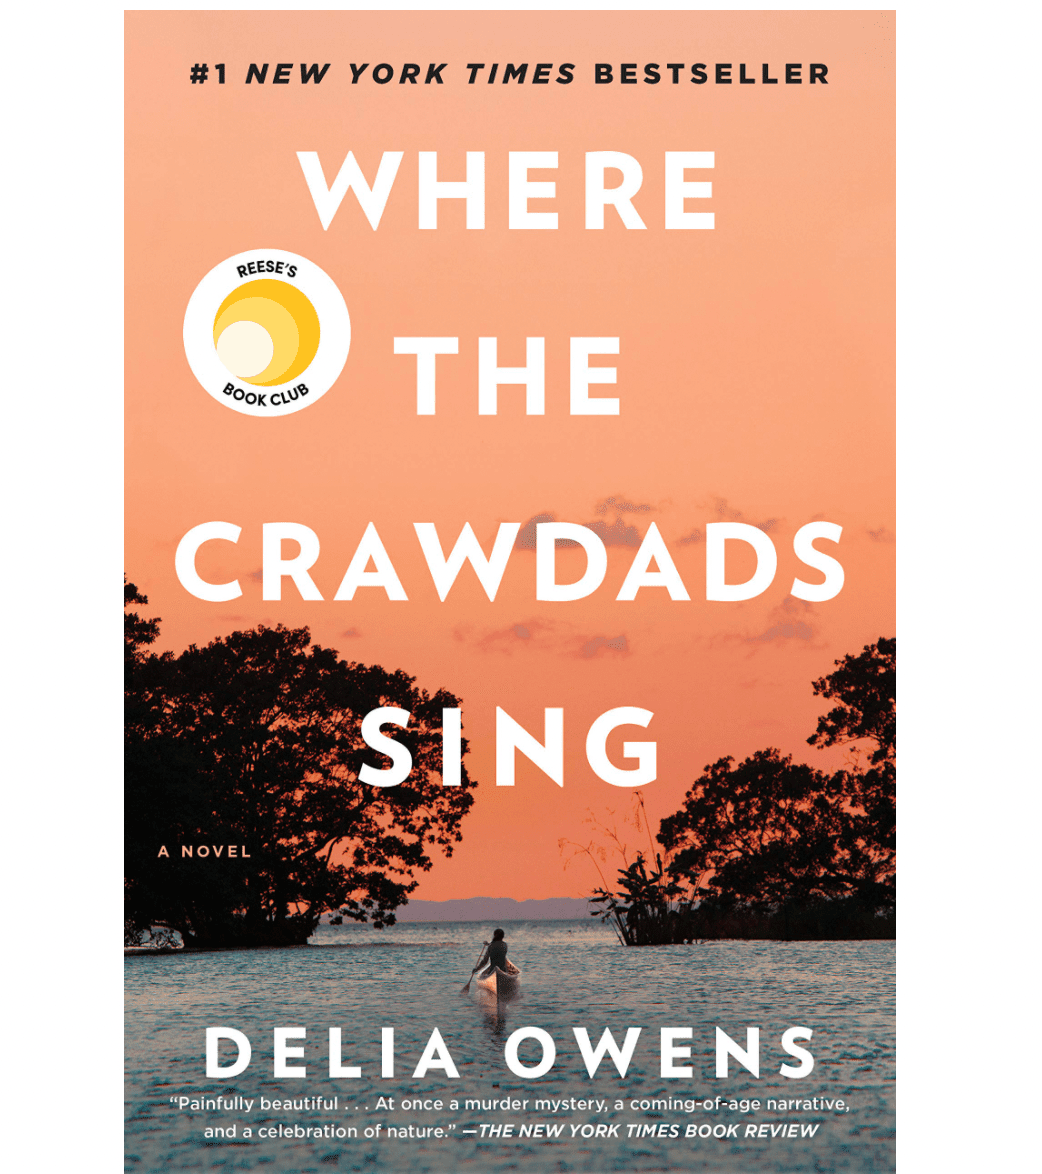 Where the Crawdads Sing, by Delia Owens